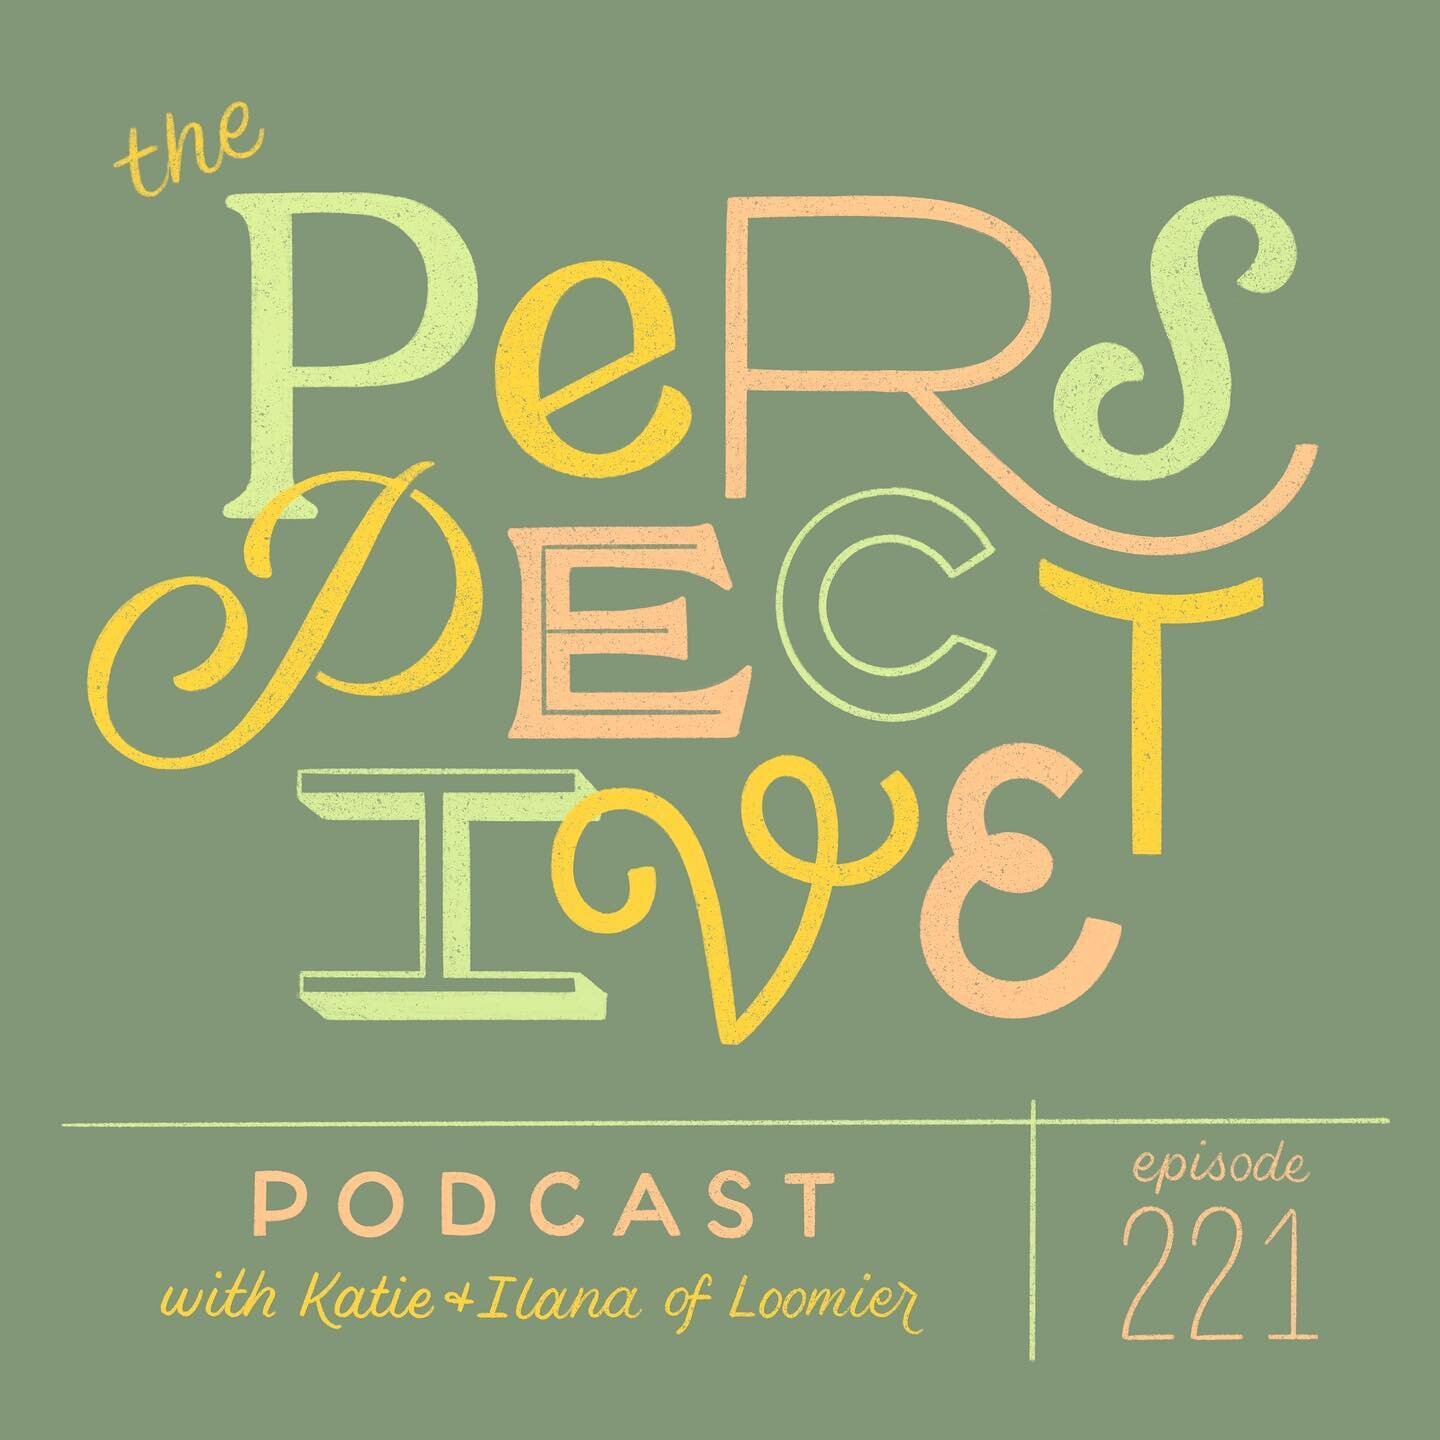 @ilanagriffo and I spoke about @loomier.co, licensing, and art biz thangs on @perspectivepodcast and our episode is out today!

Listen on Spotify, Apple podcasts, or  head to the perspective pod website to watch the video recording.